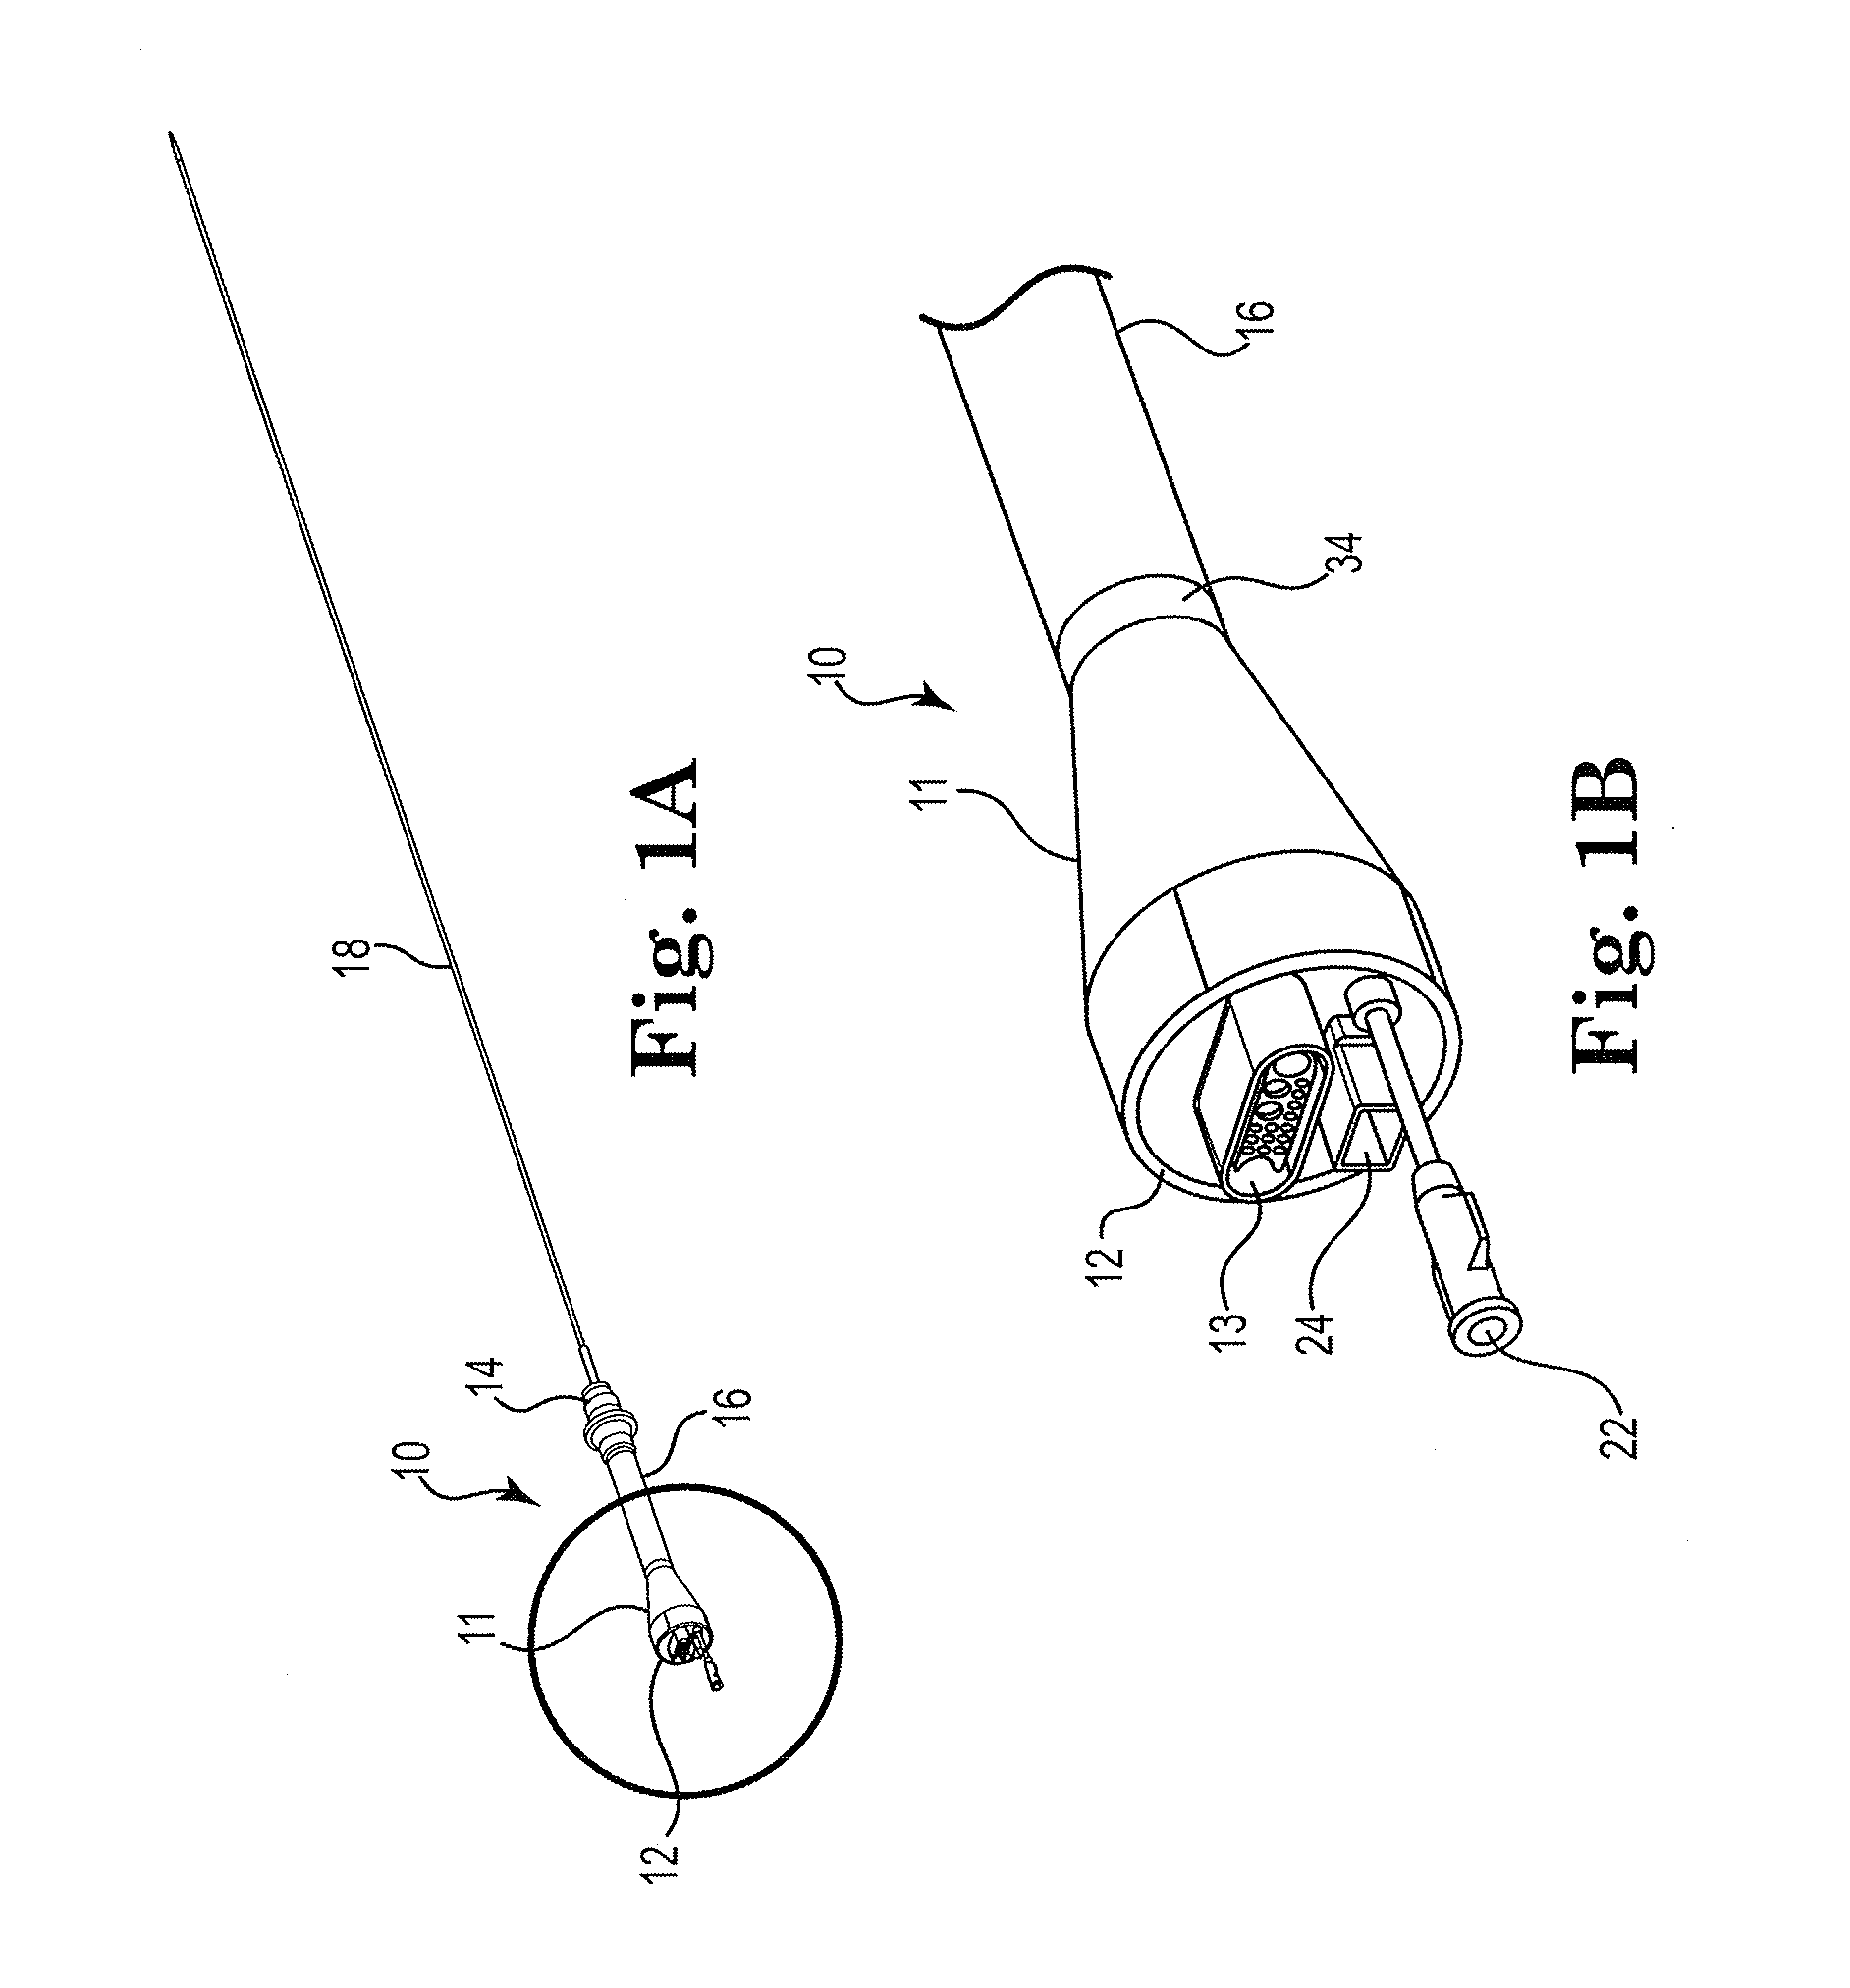 System and method for identifying and communicating with an interventional medical device